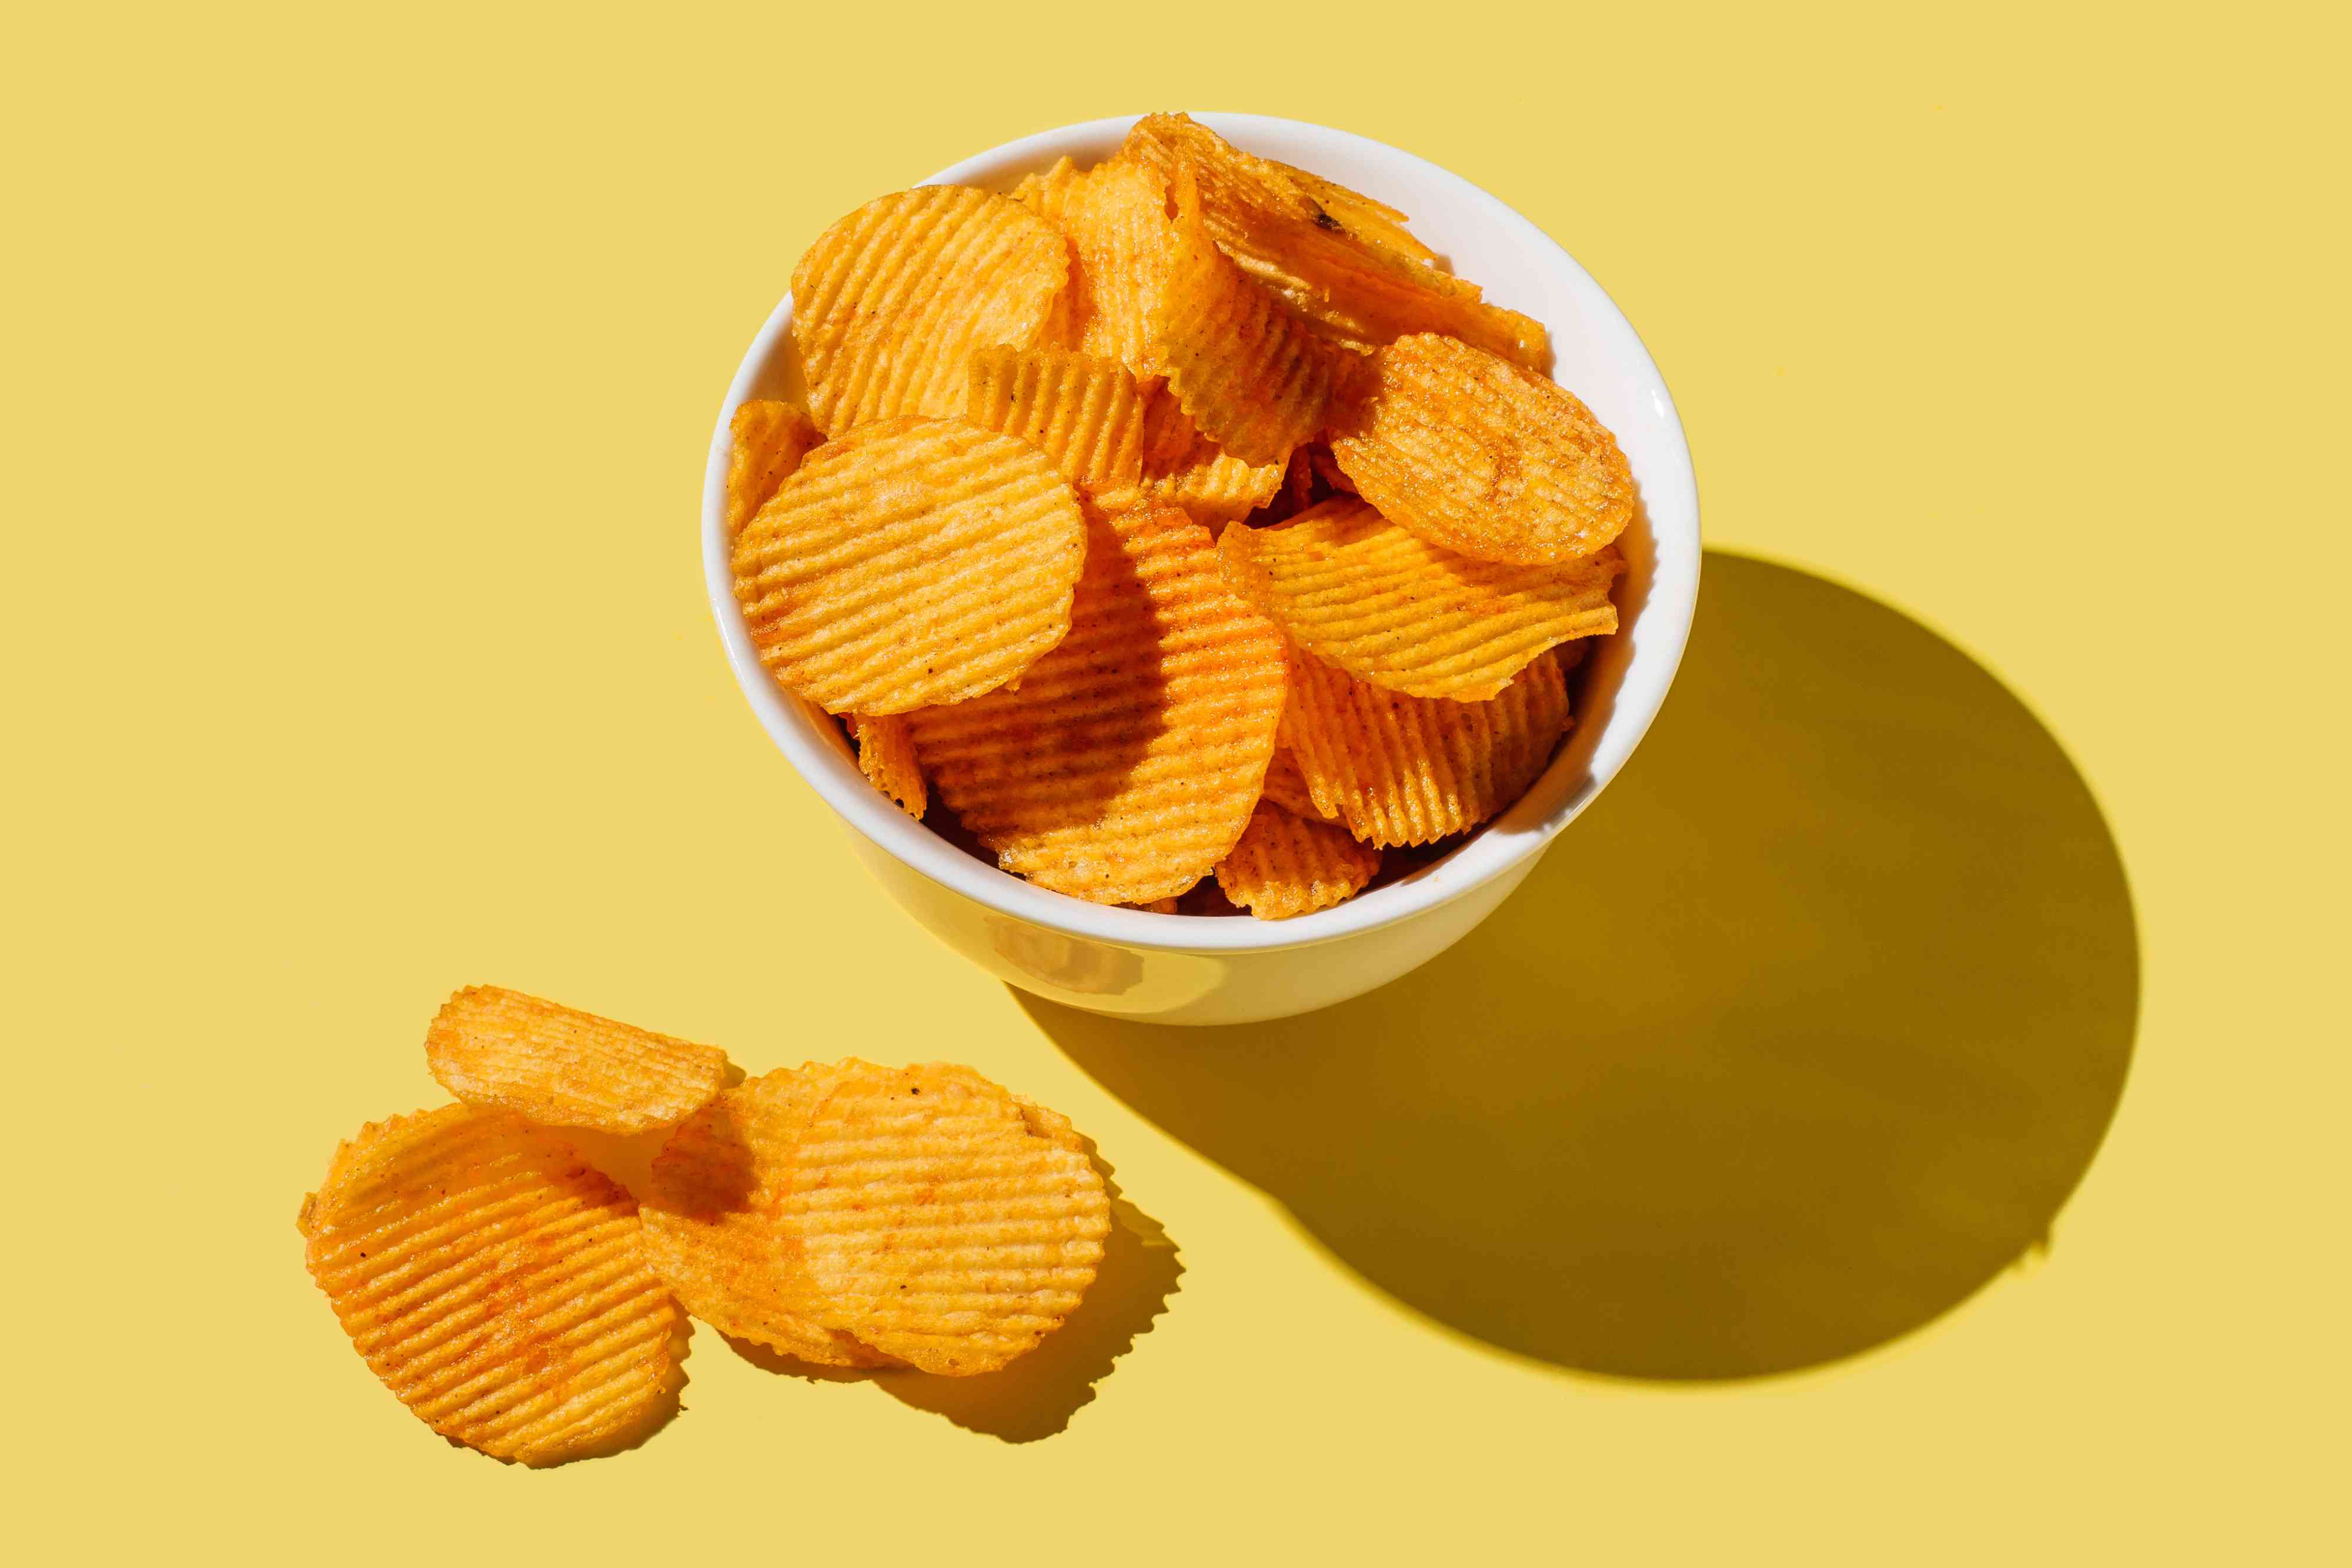 Ultra-Processed Food Linked to Heart Disease, Cancer, and 30 Other Health Conditions, Study Suggests